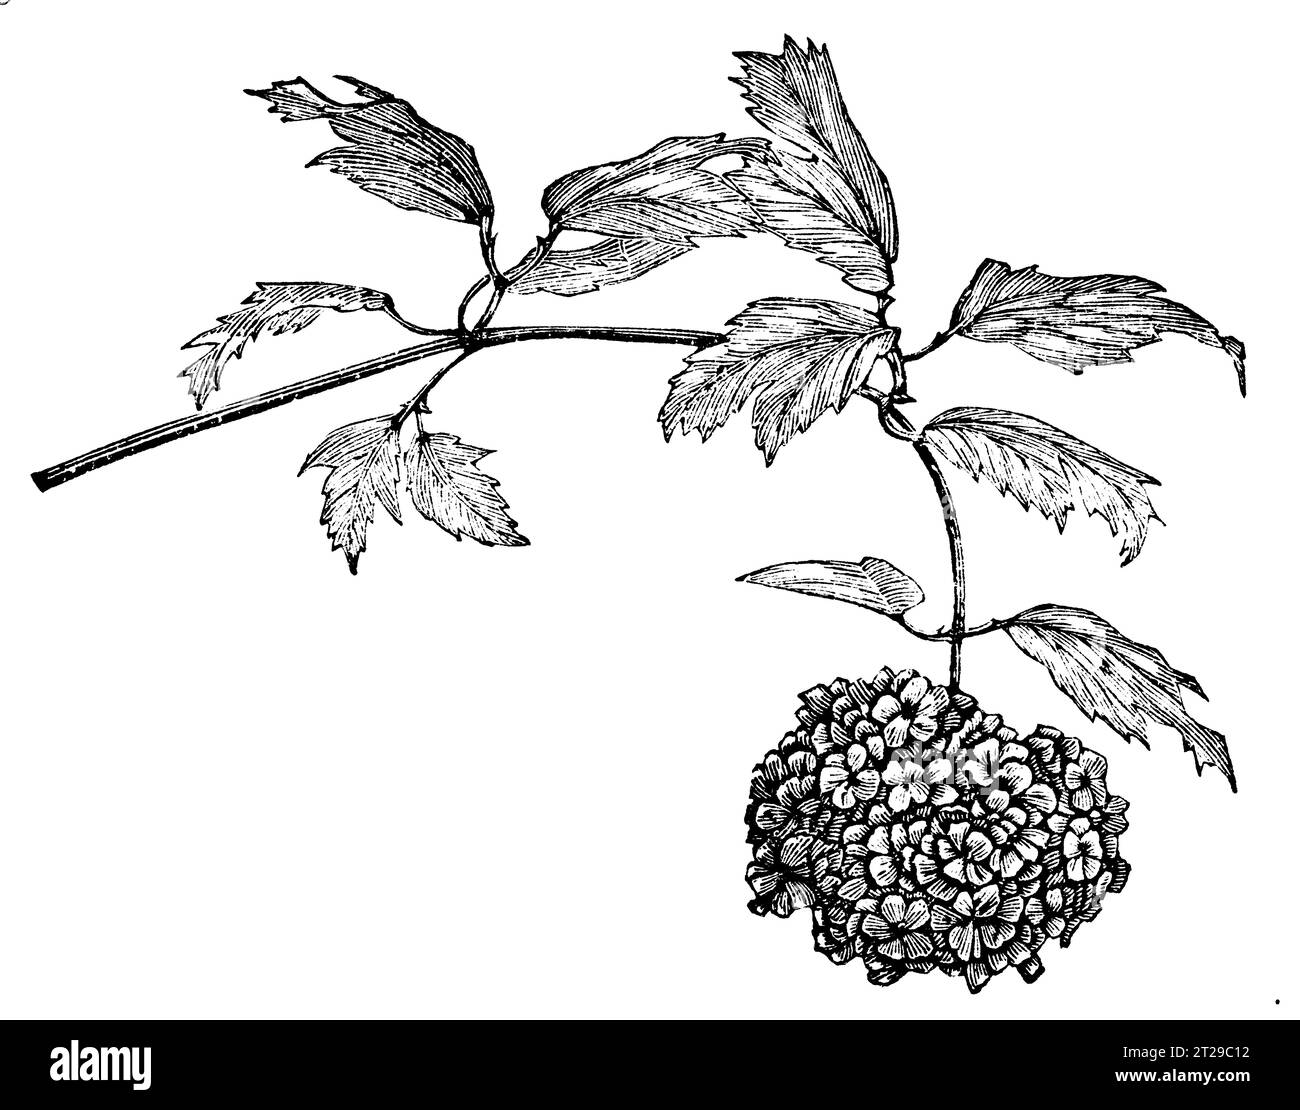 Viburnum opulus, digitally restored from 'The Condensed American Encyclopedia' published in 1882. Stock Photo